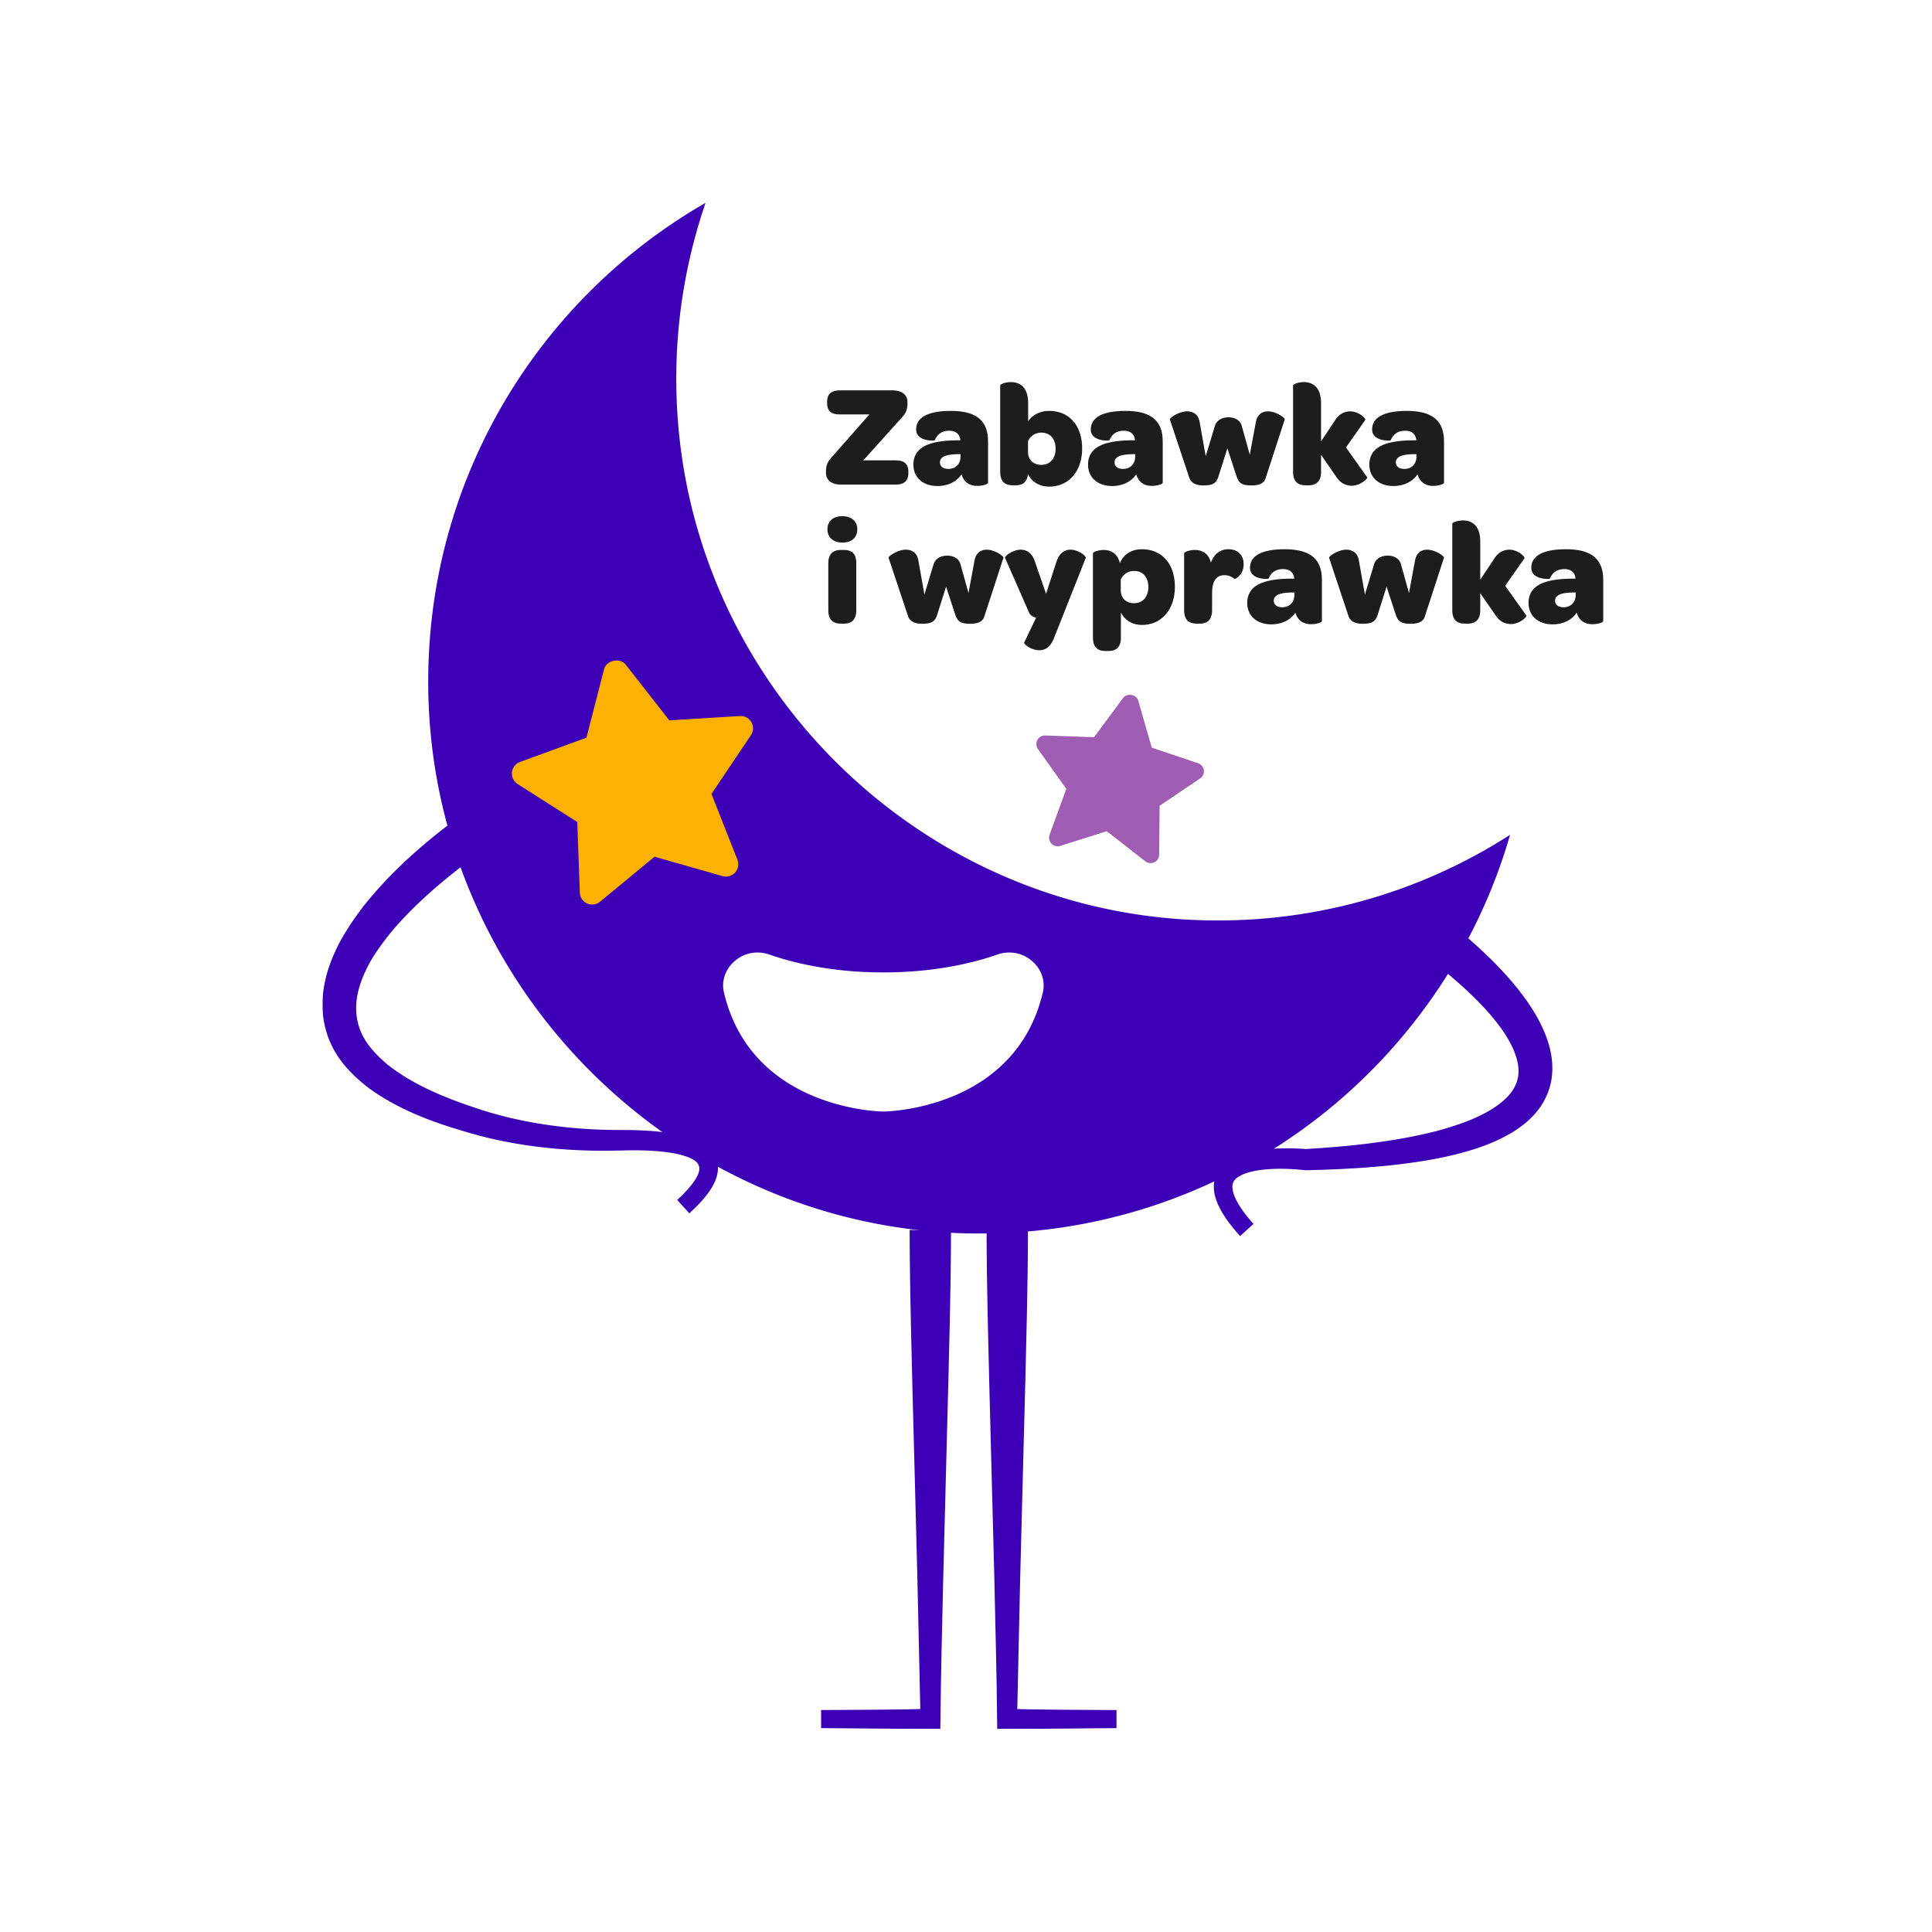 Zabawka i Wyprawka logo design by logo designer Sparrow Design for your inspiration and for the worlds largest logo competition